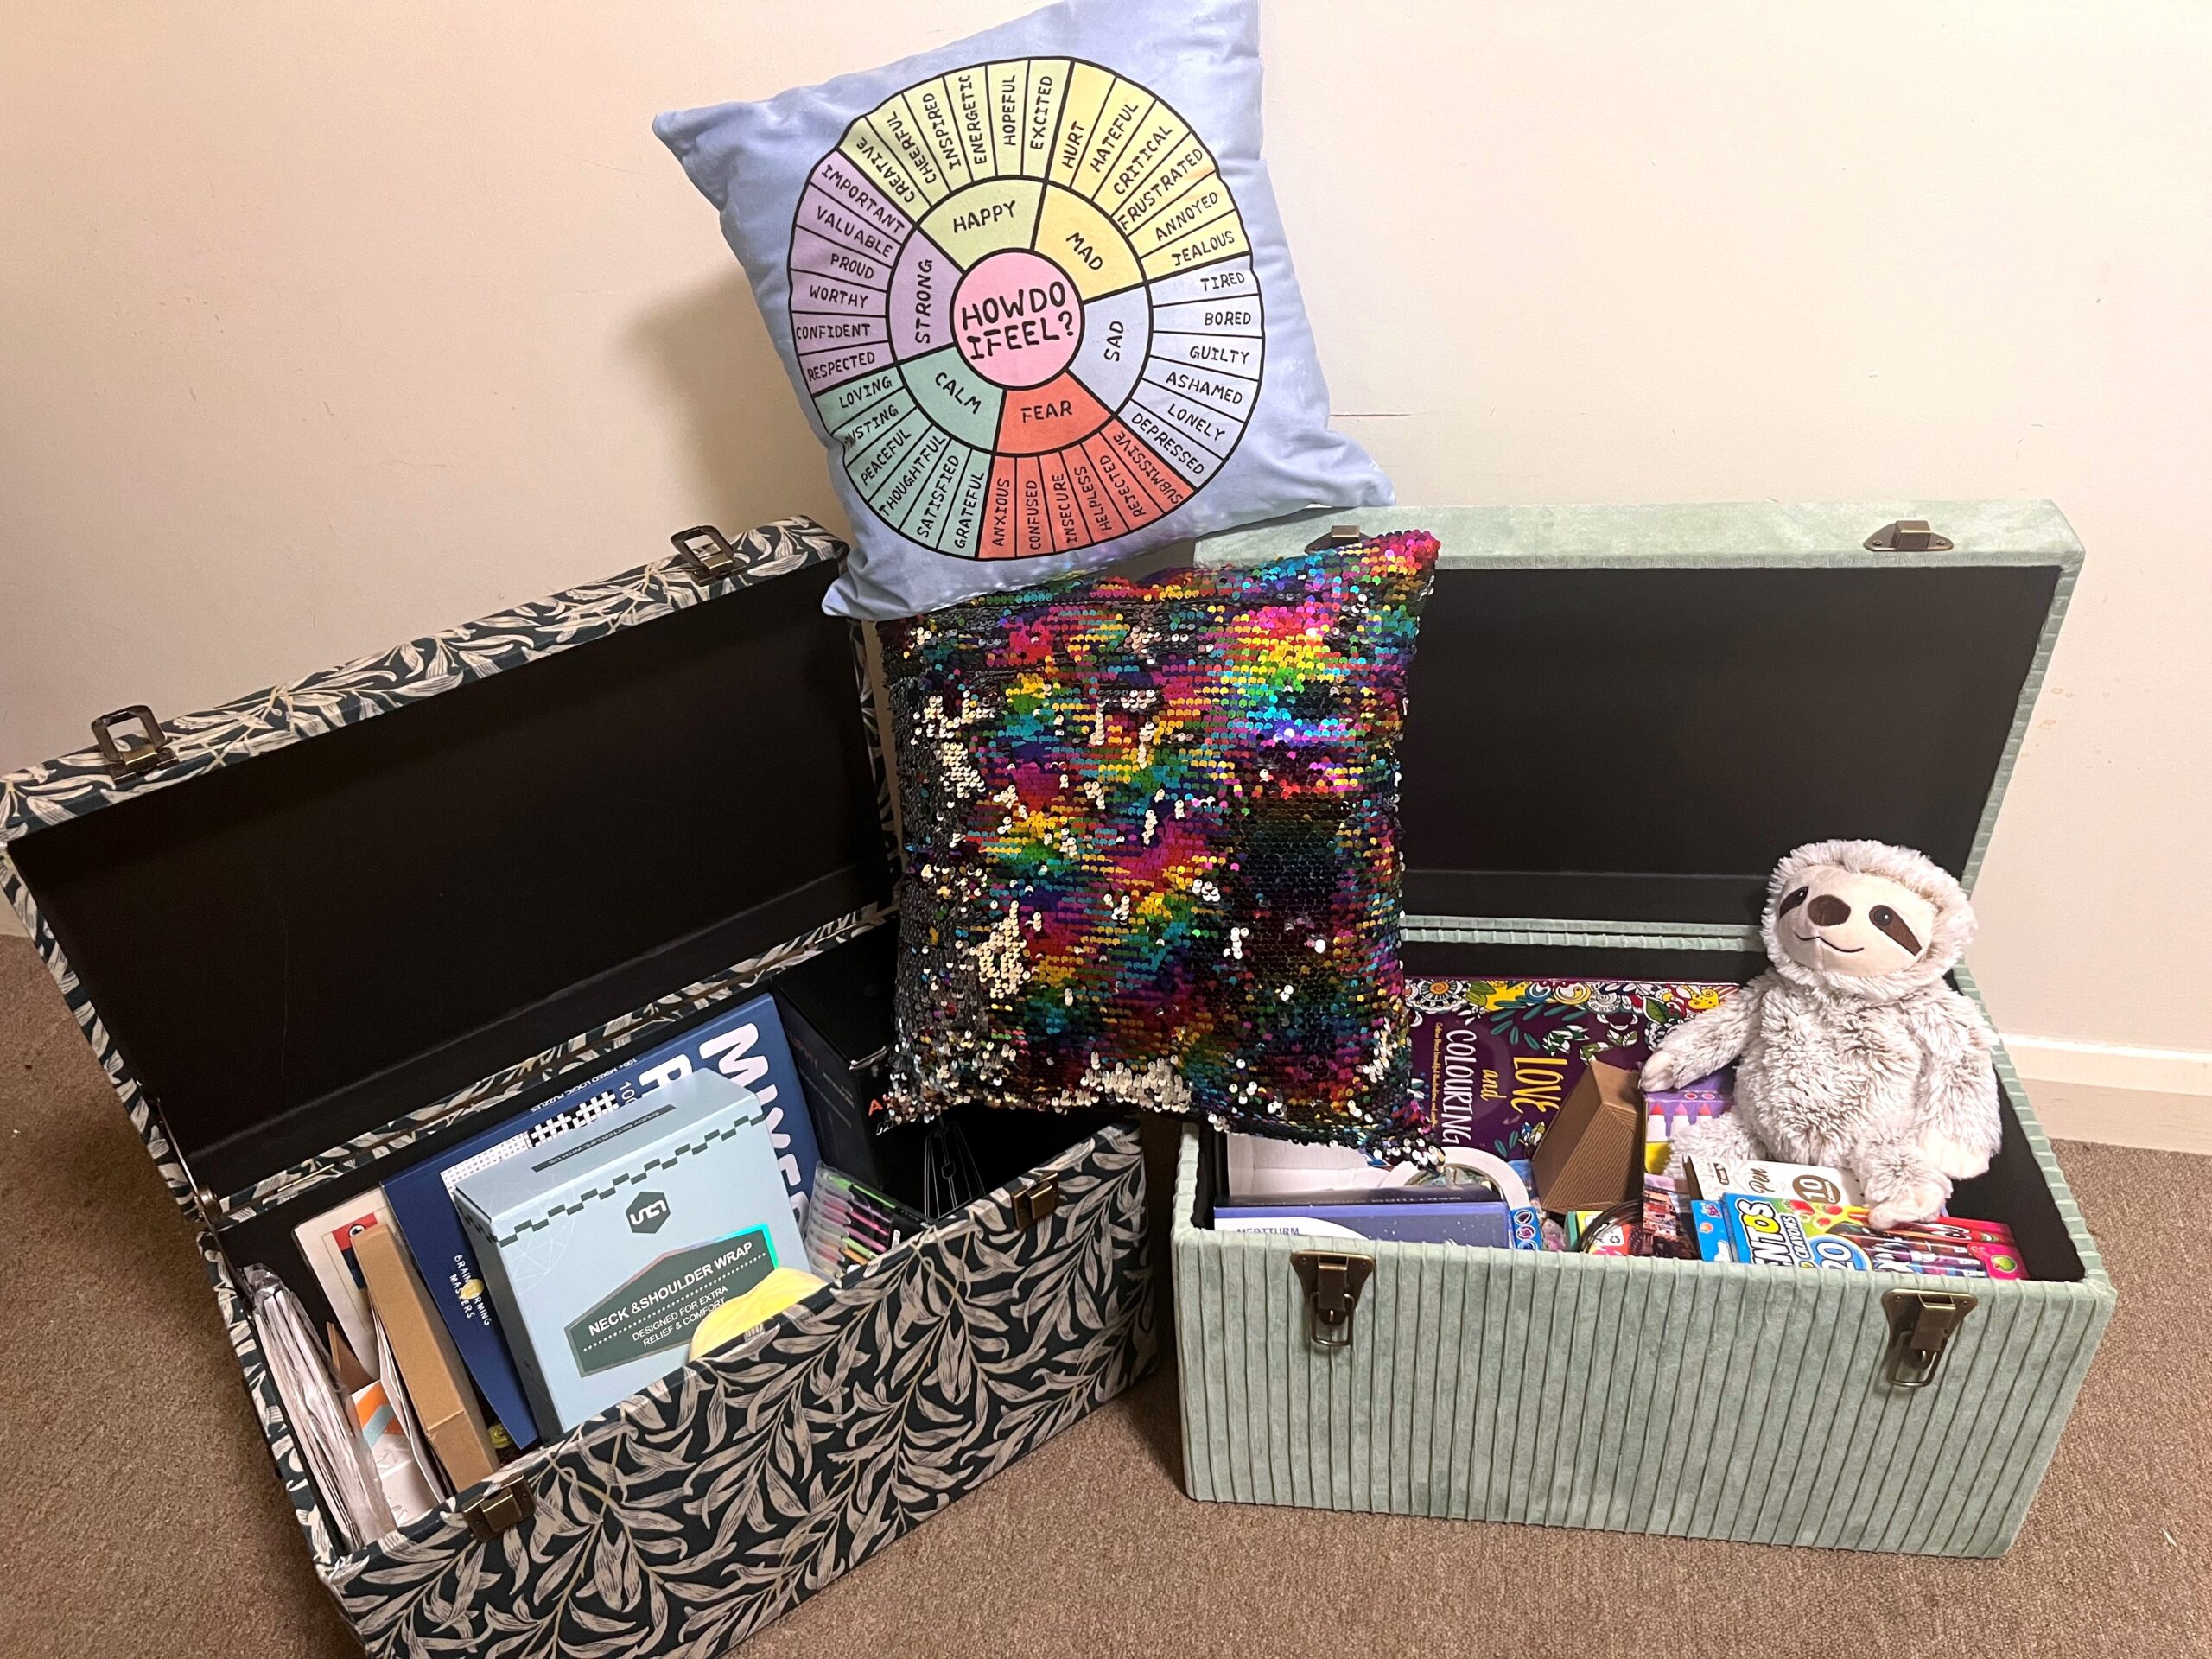 Two boxes containing sensory items such as puzzle books, scented markets, plush toys and more